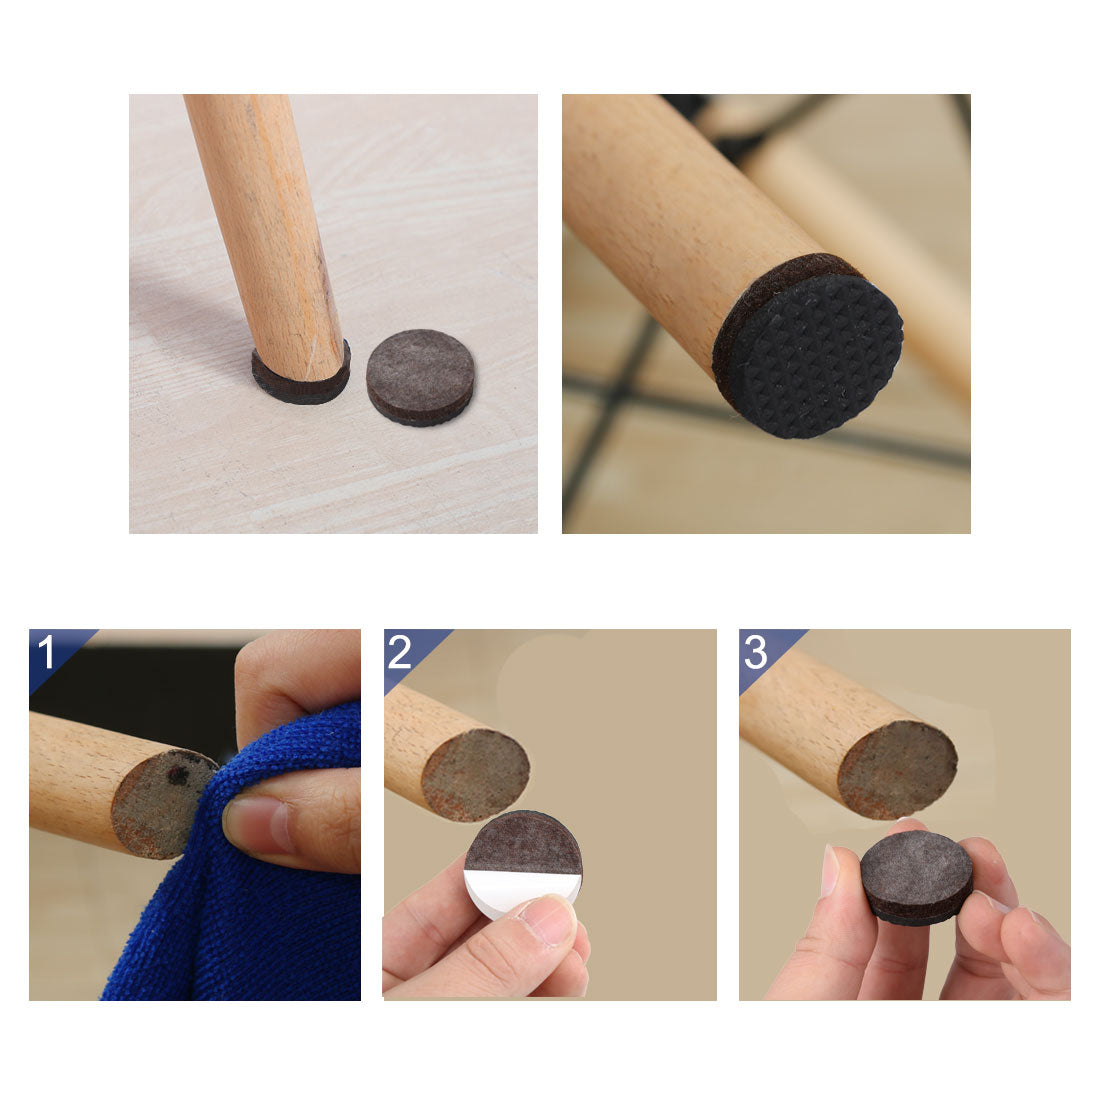 uxcell Uxcell Furniture Felt Pads Grippers Round 7/8 Inch Self Stick Anti-slip Brown 50pcs